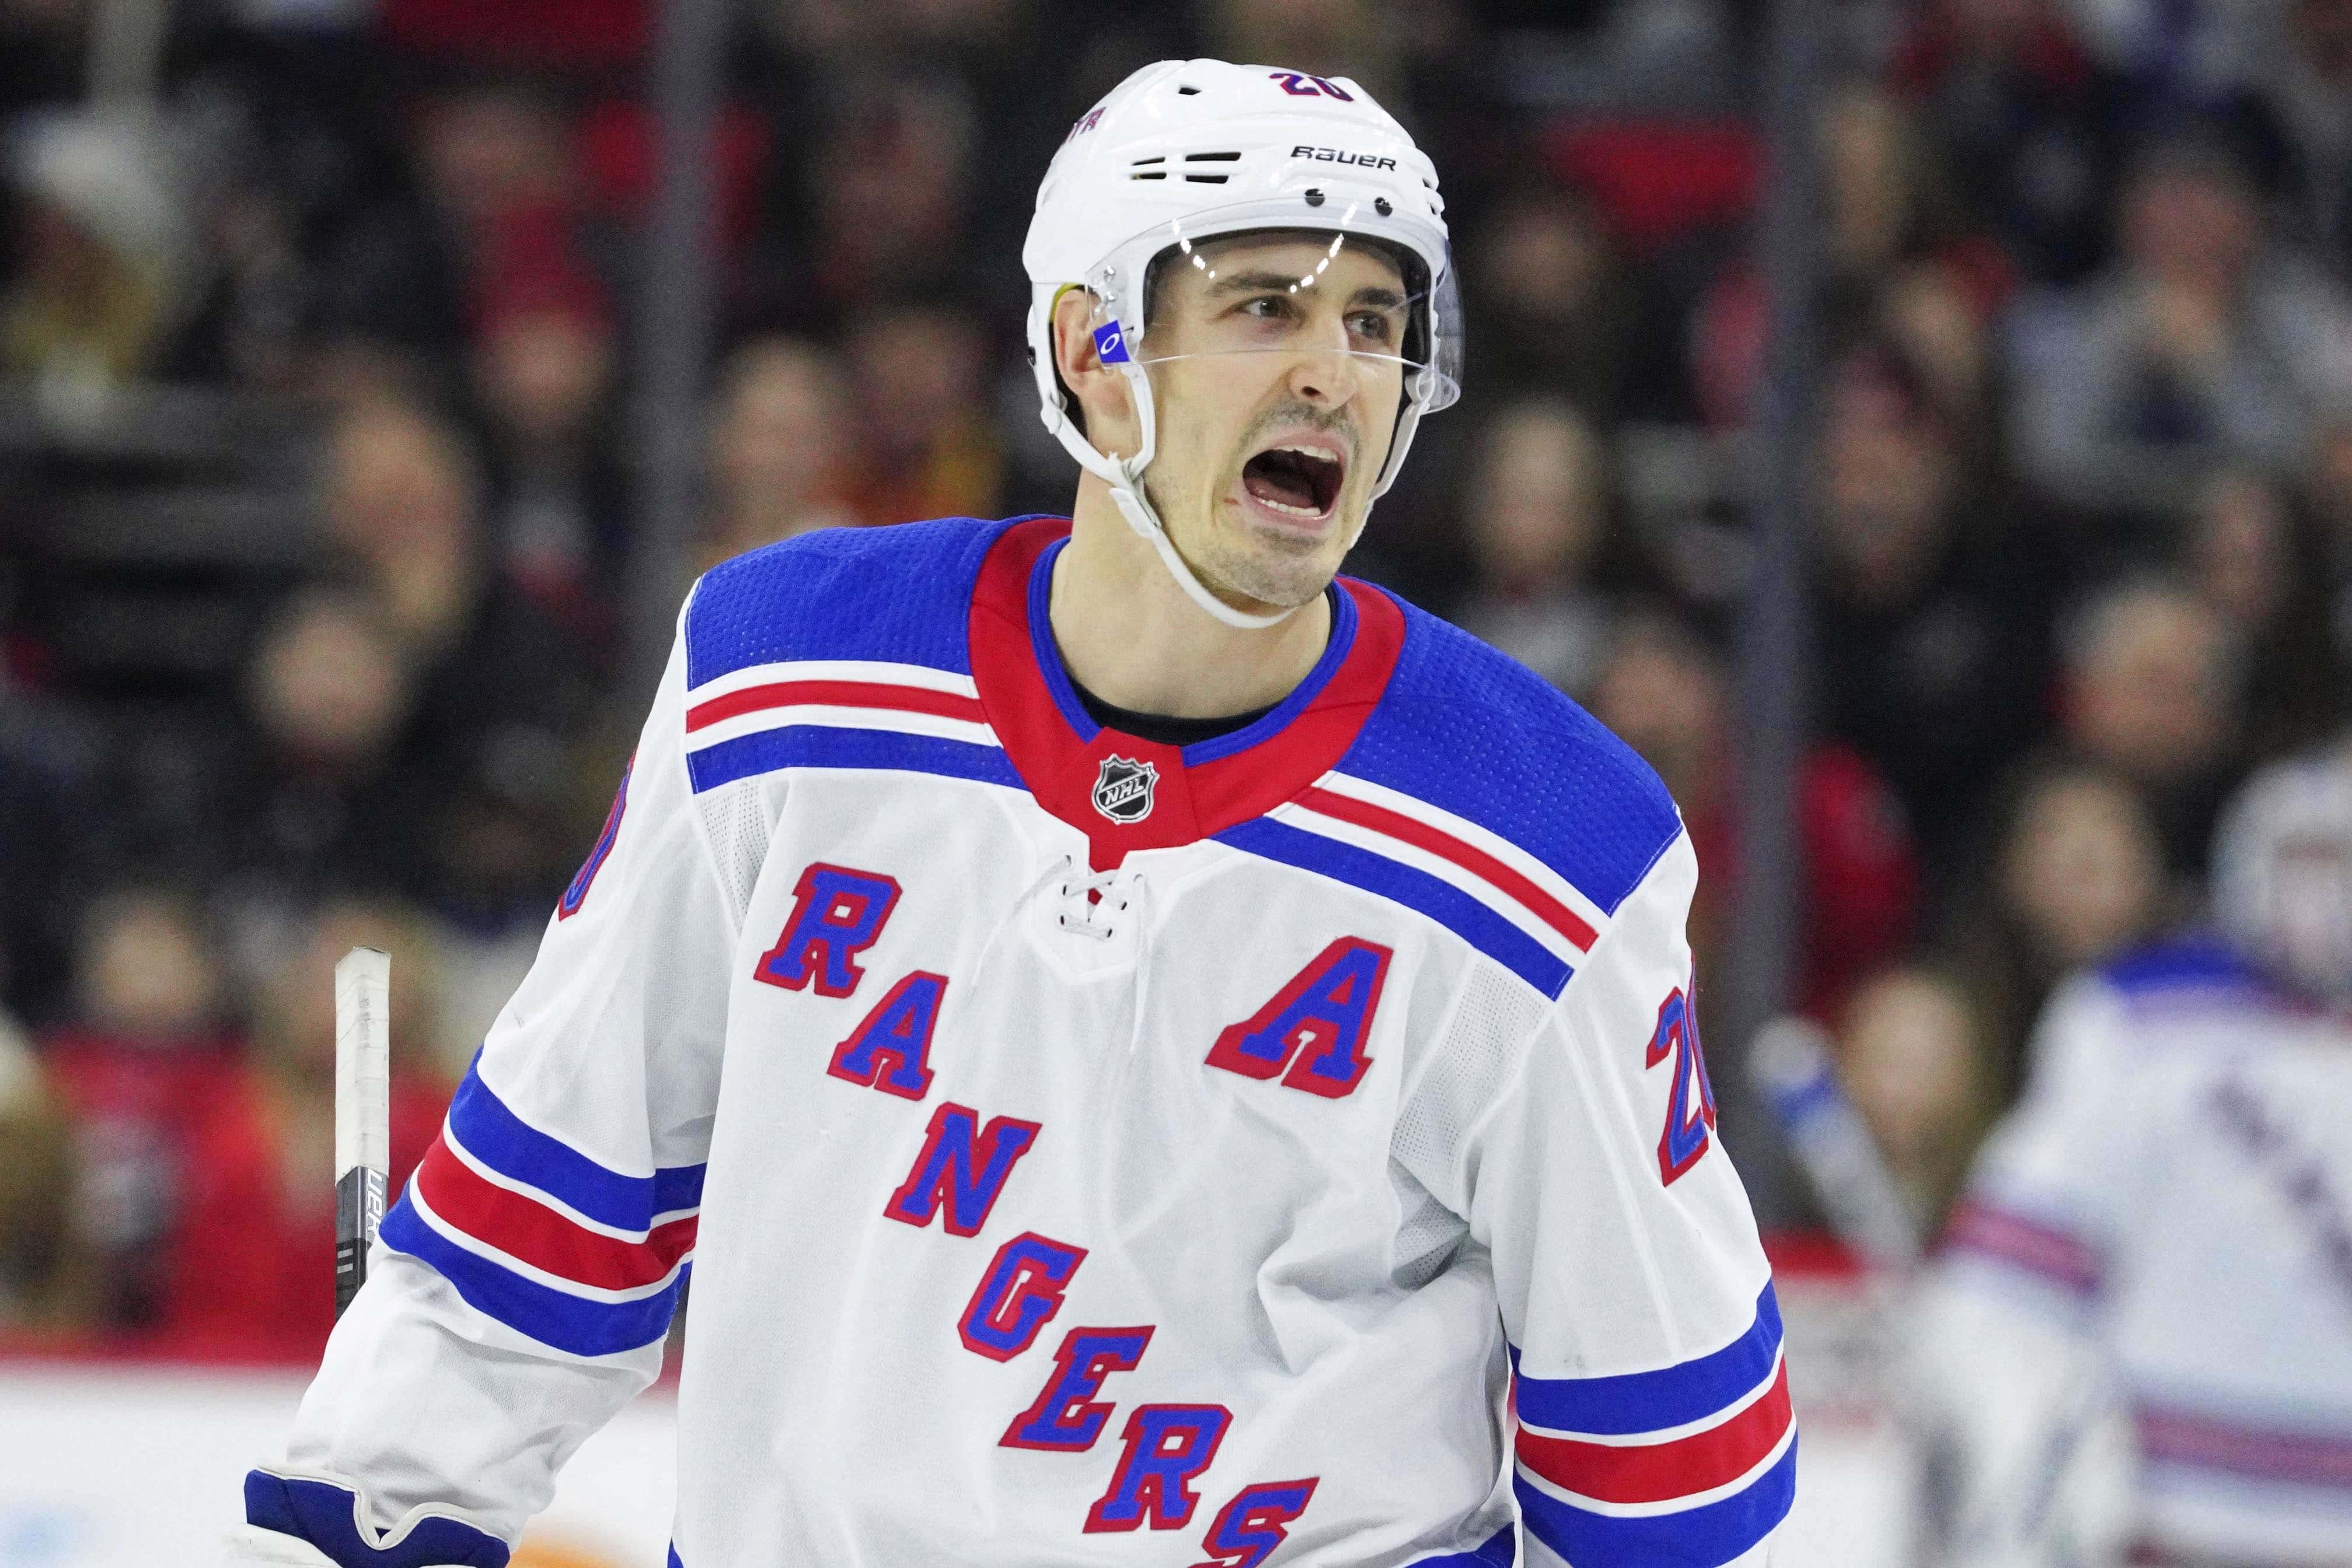 Feb 21, 2020; Raleigh, North Carolina, USA; New York Rangers left wing Chris Kreider (20) reacts during the third period against the Carolina Hurricanes at PNC Arena. The New York Rangers defeated the Carolina Hurricanes 5-2. Mandatory Credit: James Guillory-USA TODAY Sports